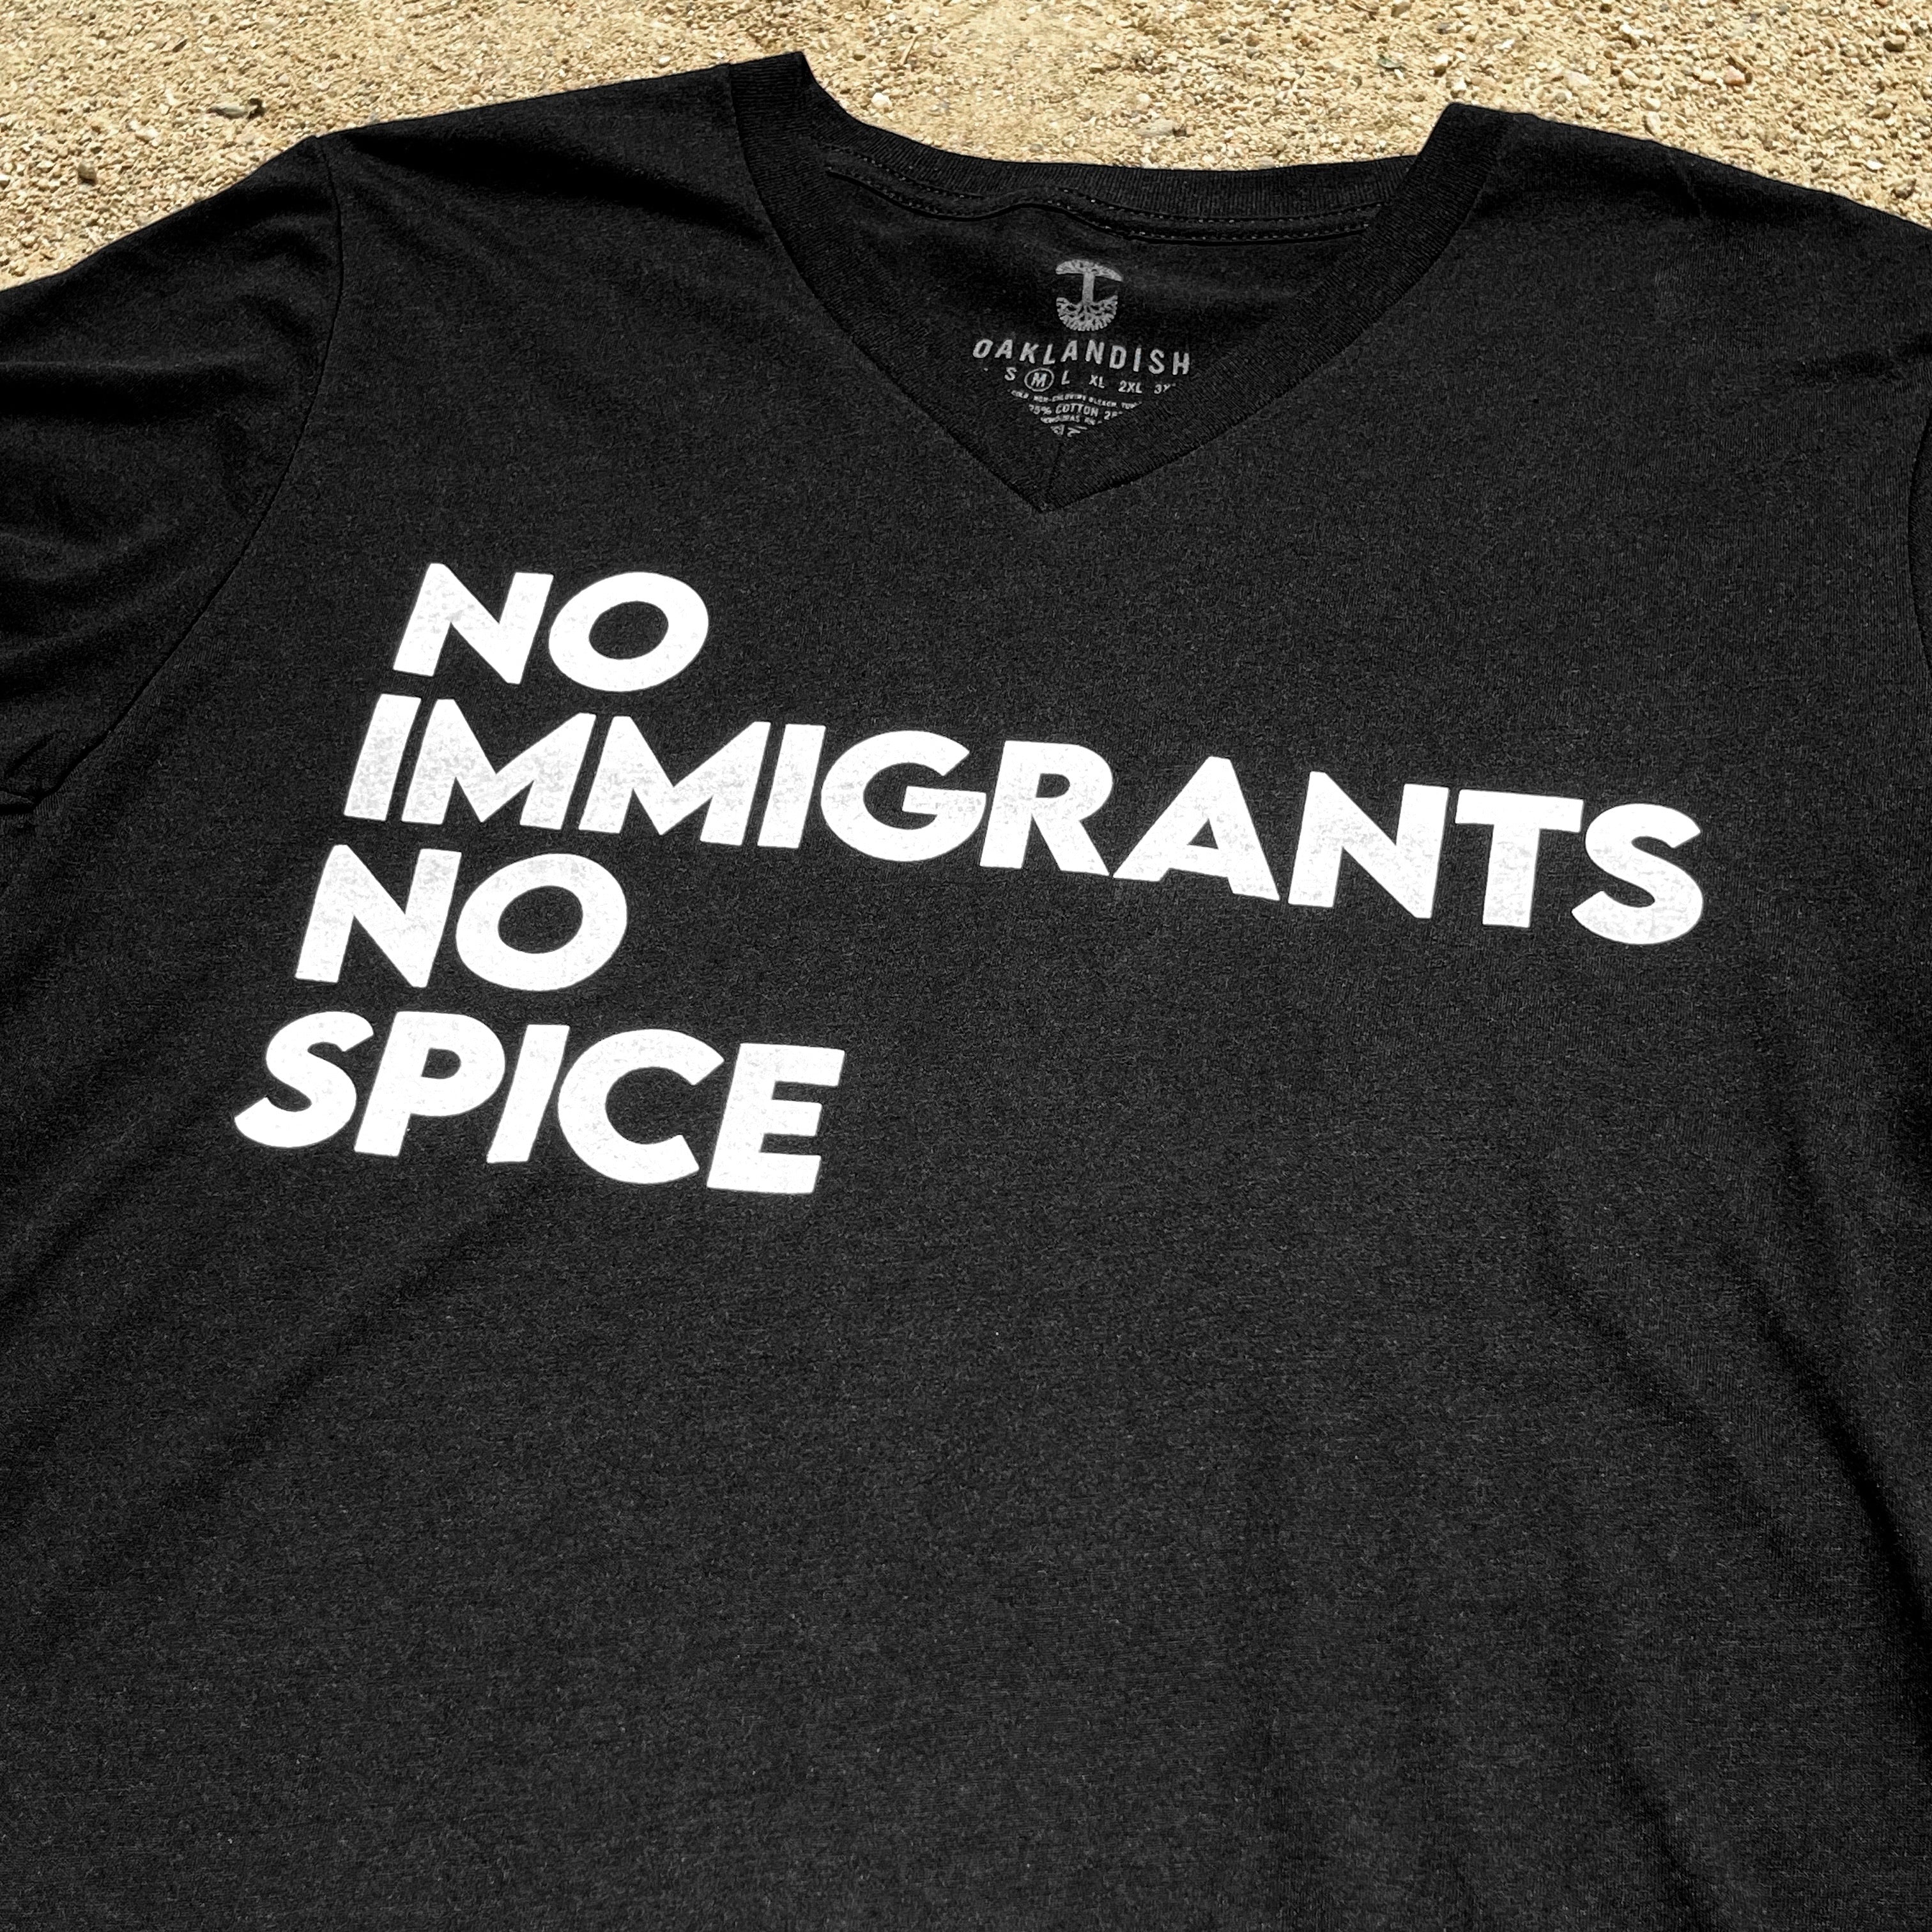 Close-up of black V-neck t-shirt with white No Immigrants, No Spice wordmark laying on sand.